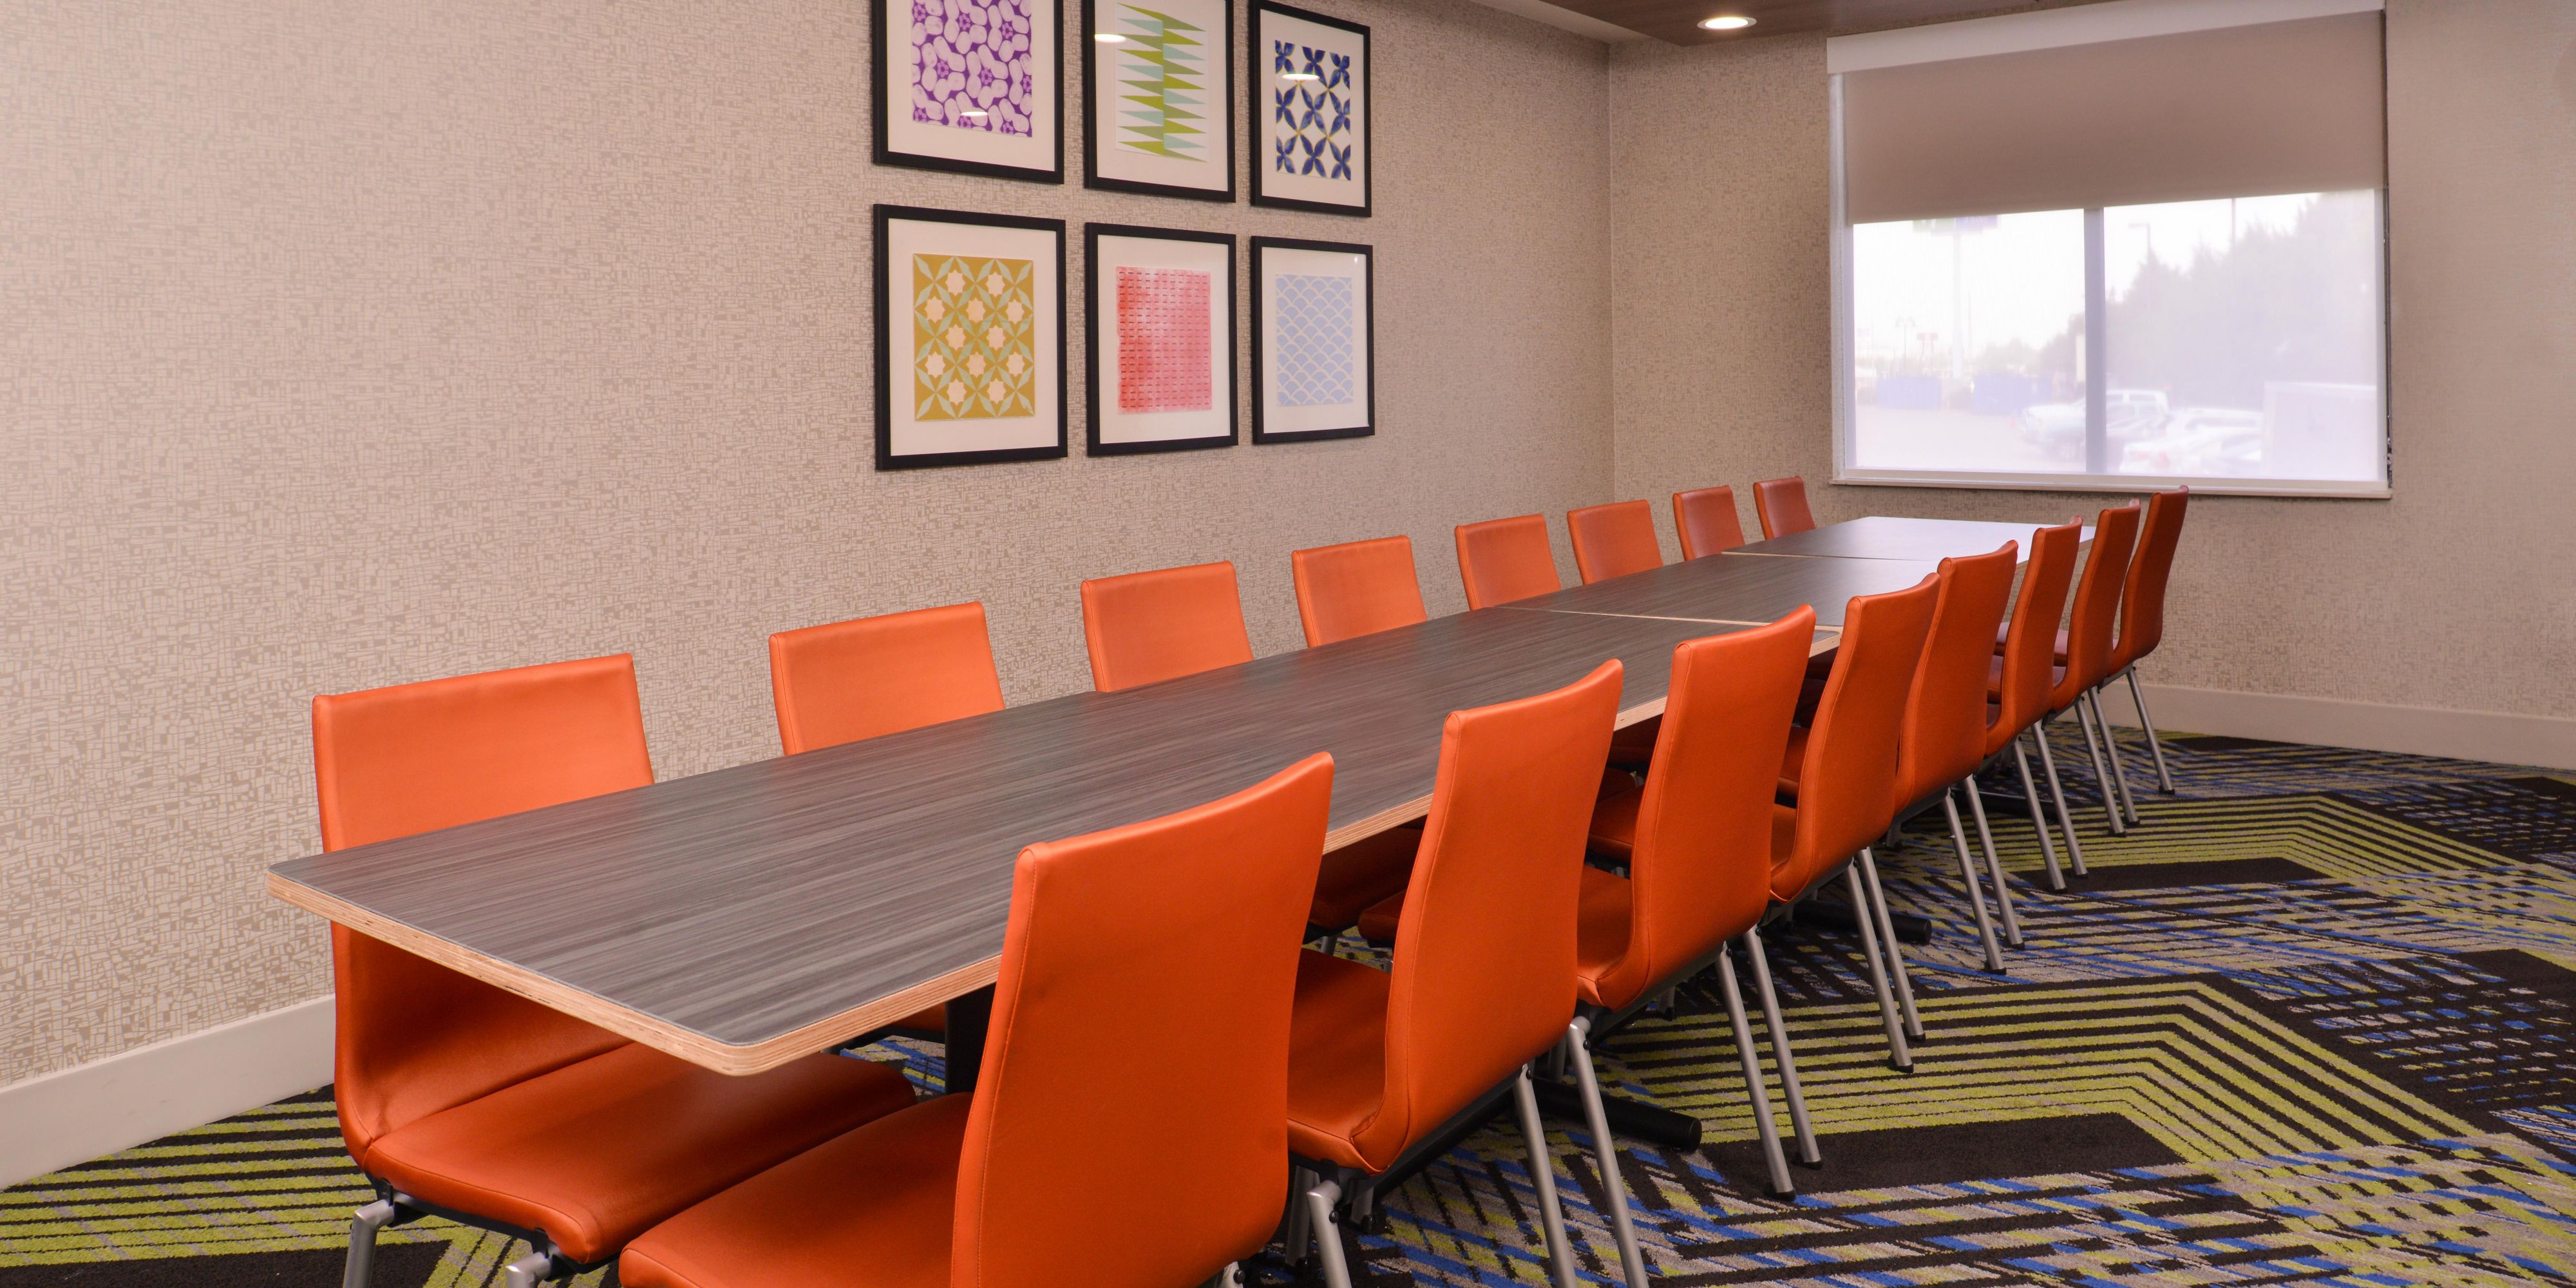 Small meetings play a vital role in the success of many organizations.  Are you planning a small corporate meeting, board retreat or brainstorming session?  Our flexible meeting space is sure to lead to big ideas!  Whether you're a group of 15 or 40, we can help!  Our General Manager is dedicated to making your meeting a huge success!  
